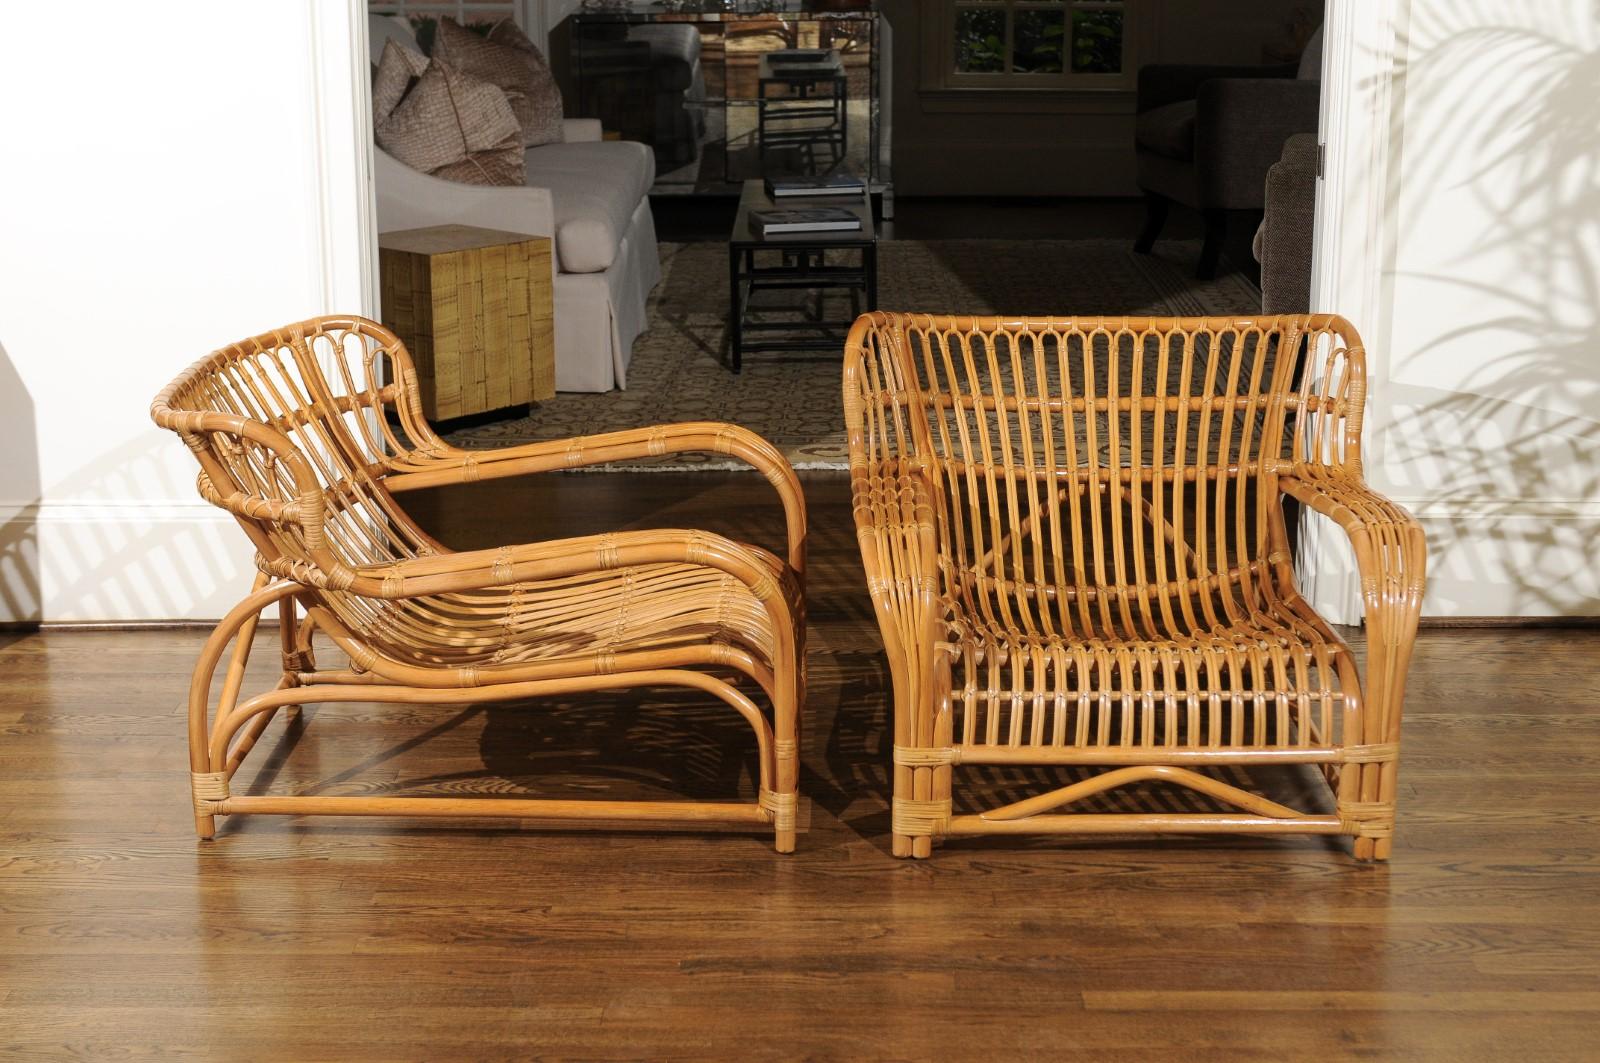 Spectacular Pair of Custom Commissioned Loungers after Viggo Boesen (Art déco)